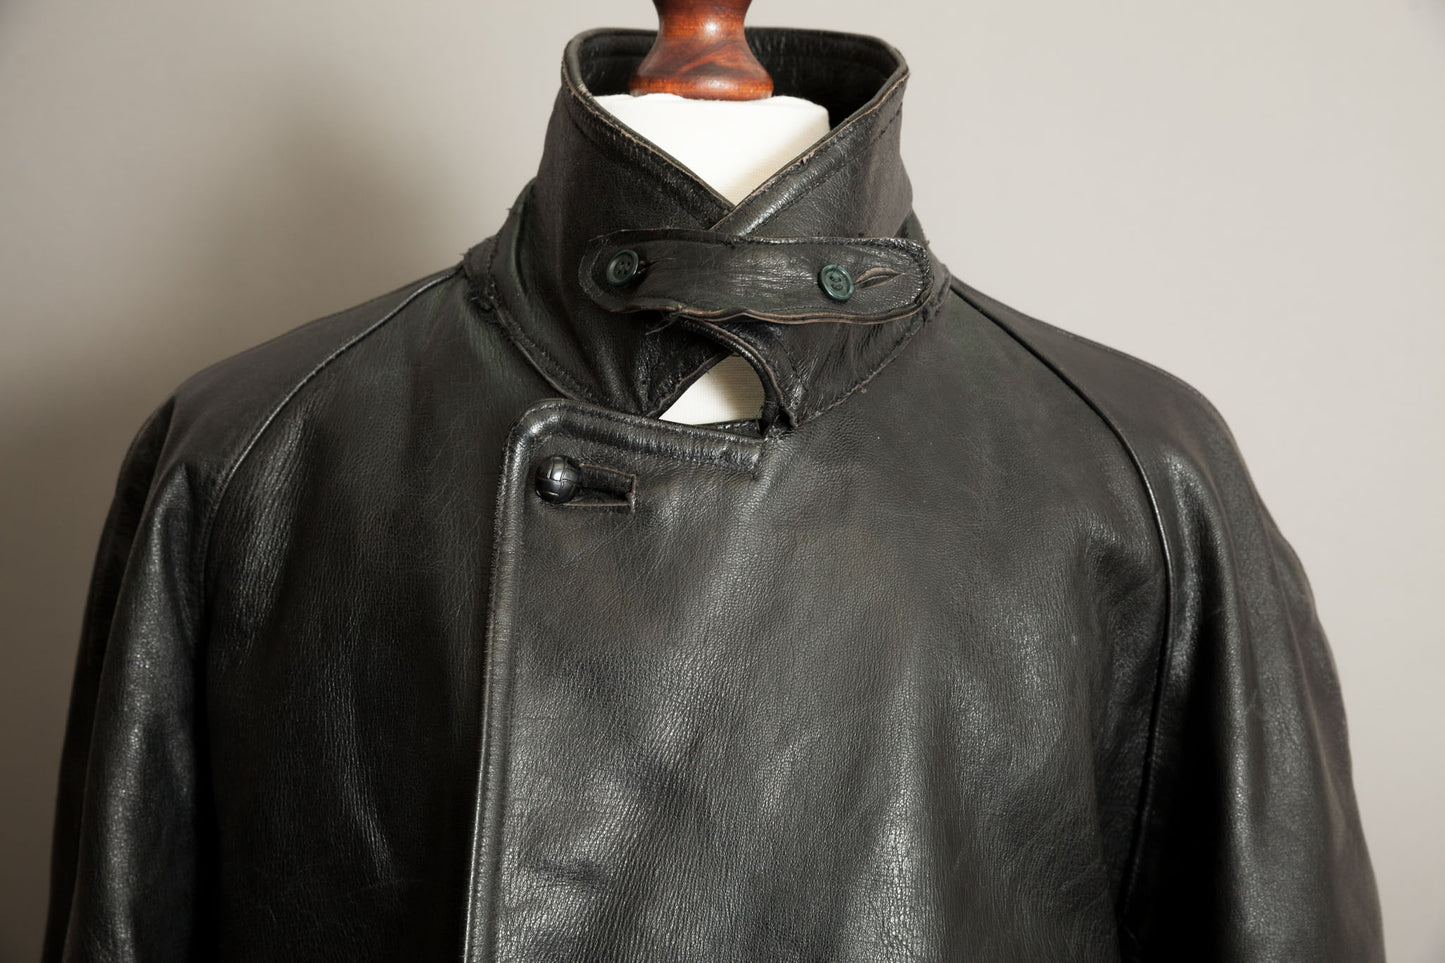 Vintage 1940s Italian Police Officers Leather Jacket - XL (46)